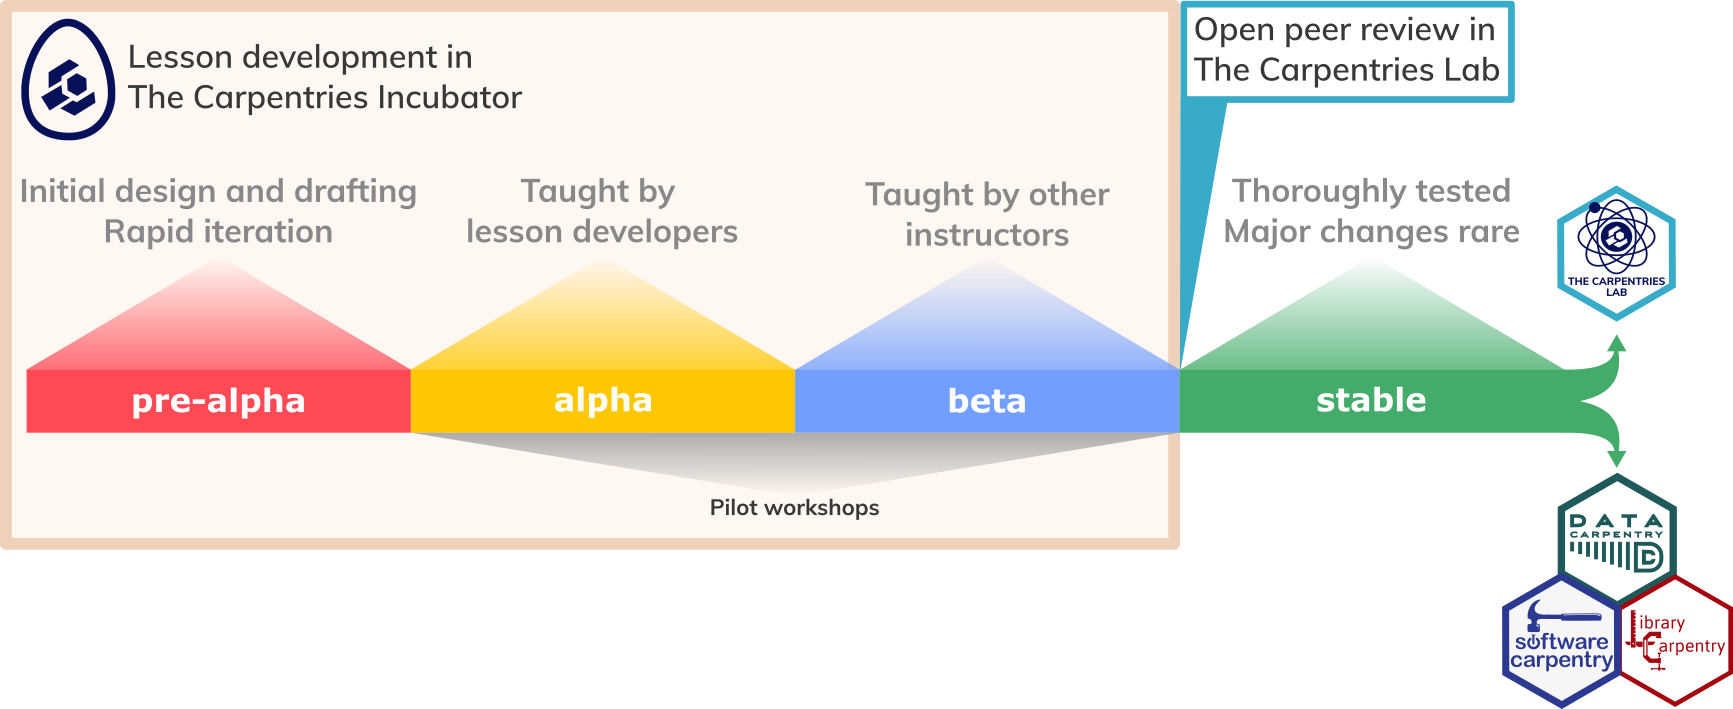 The life cycle of a lesson in The Carpentries ecosystem,  annotated to indicate the platforms provided for lesson projects at each stage of the cycle. In the diagram includes the pre-alpha, alpha, beta, and stable stages described earlier, and icons showing that pre-alpha through beta development of lessons happens in The Carpentries Incubator, while The Carpentries Lab hosts peer-reviewed lessons and provides a platform for open peer review. Stable lessons may also be adopted into an official lesson program of The Carpentries.